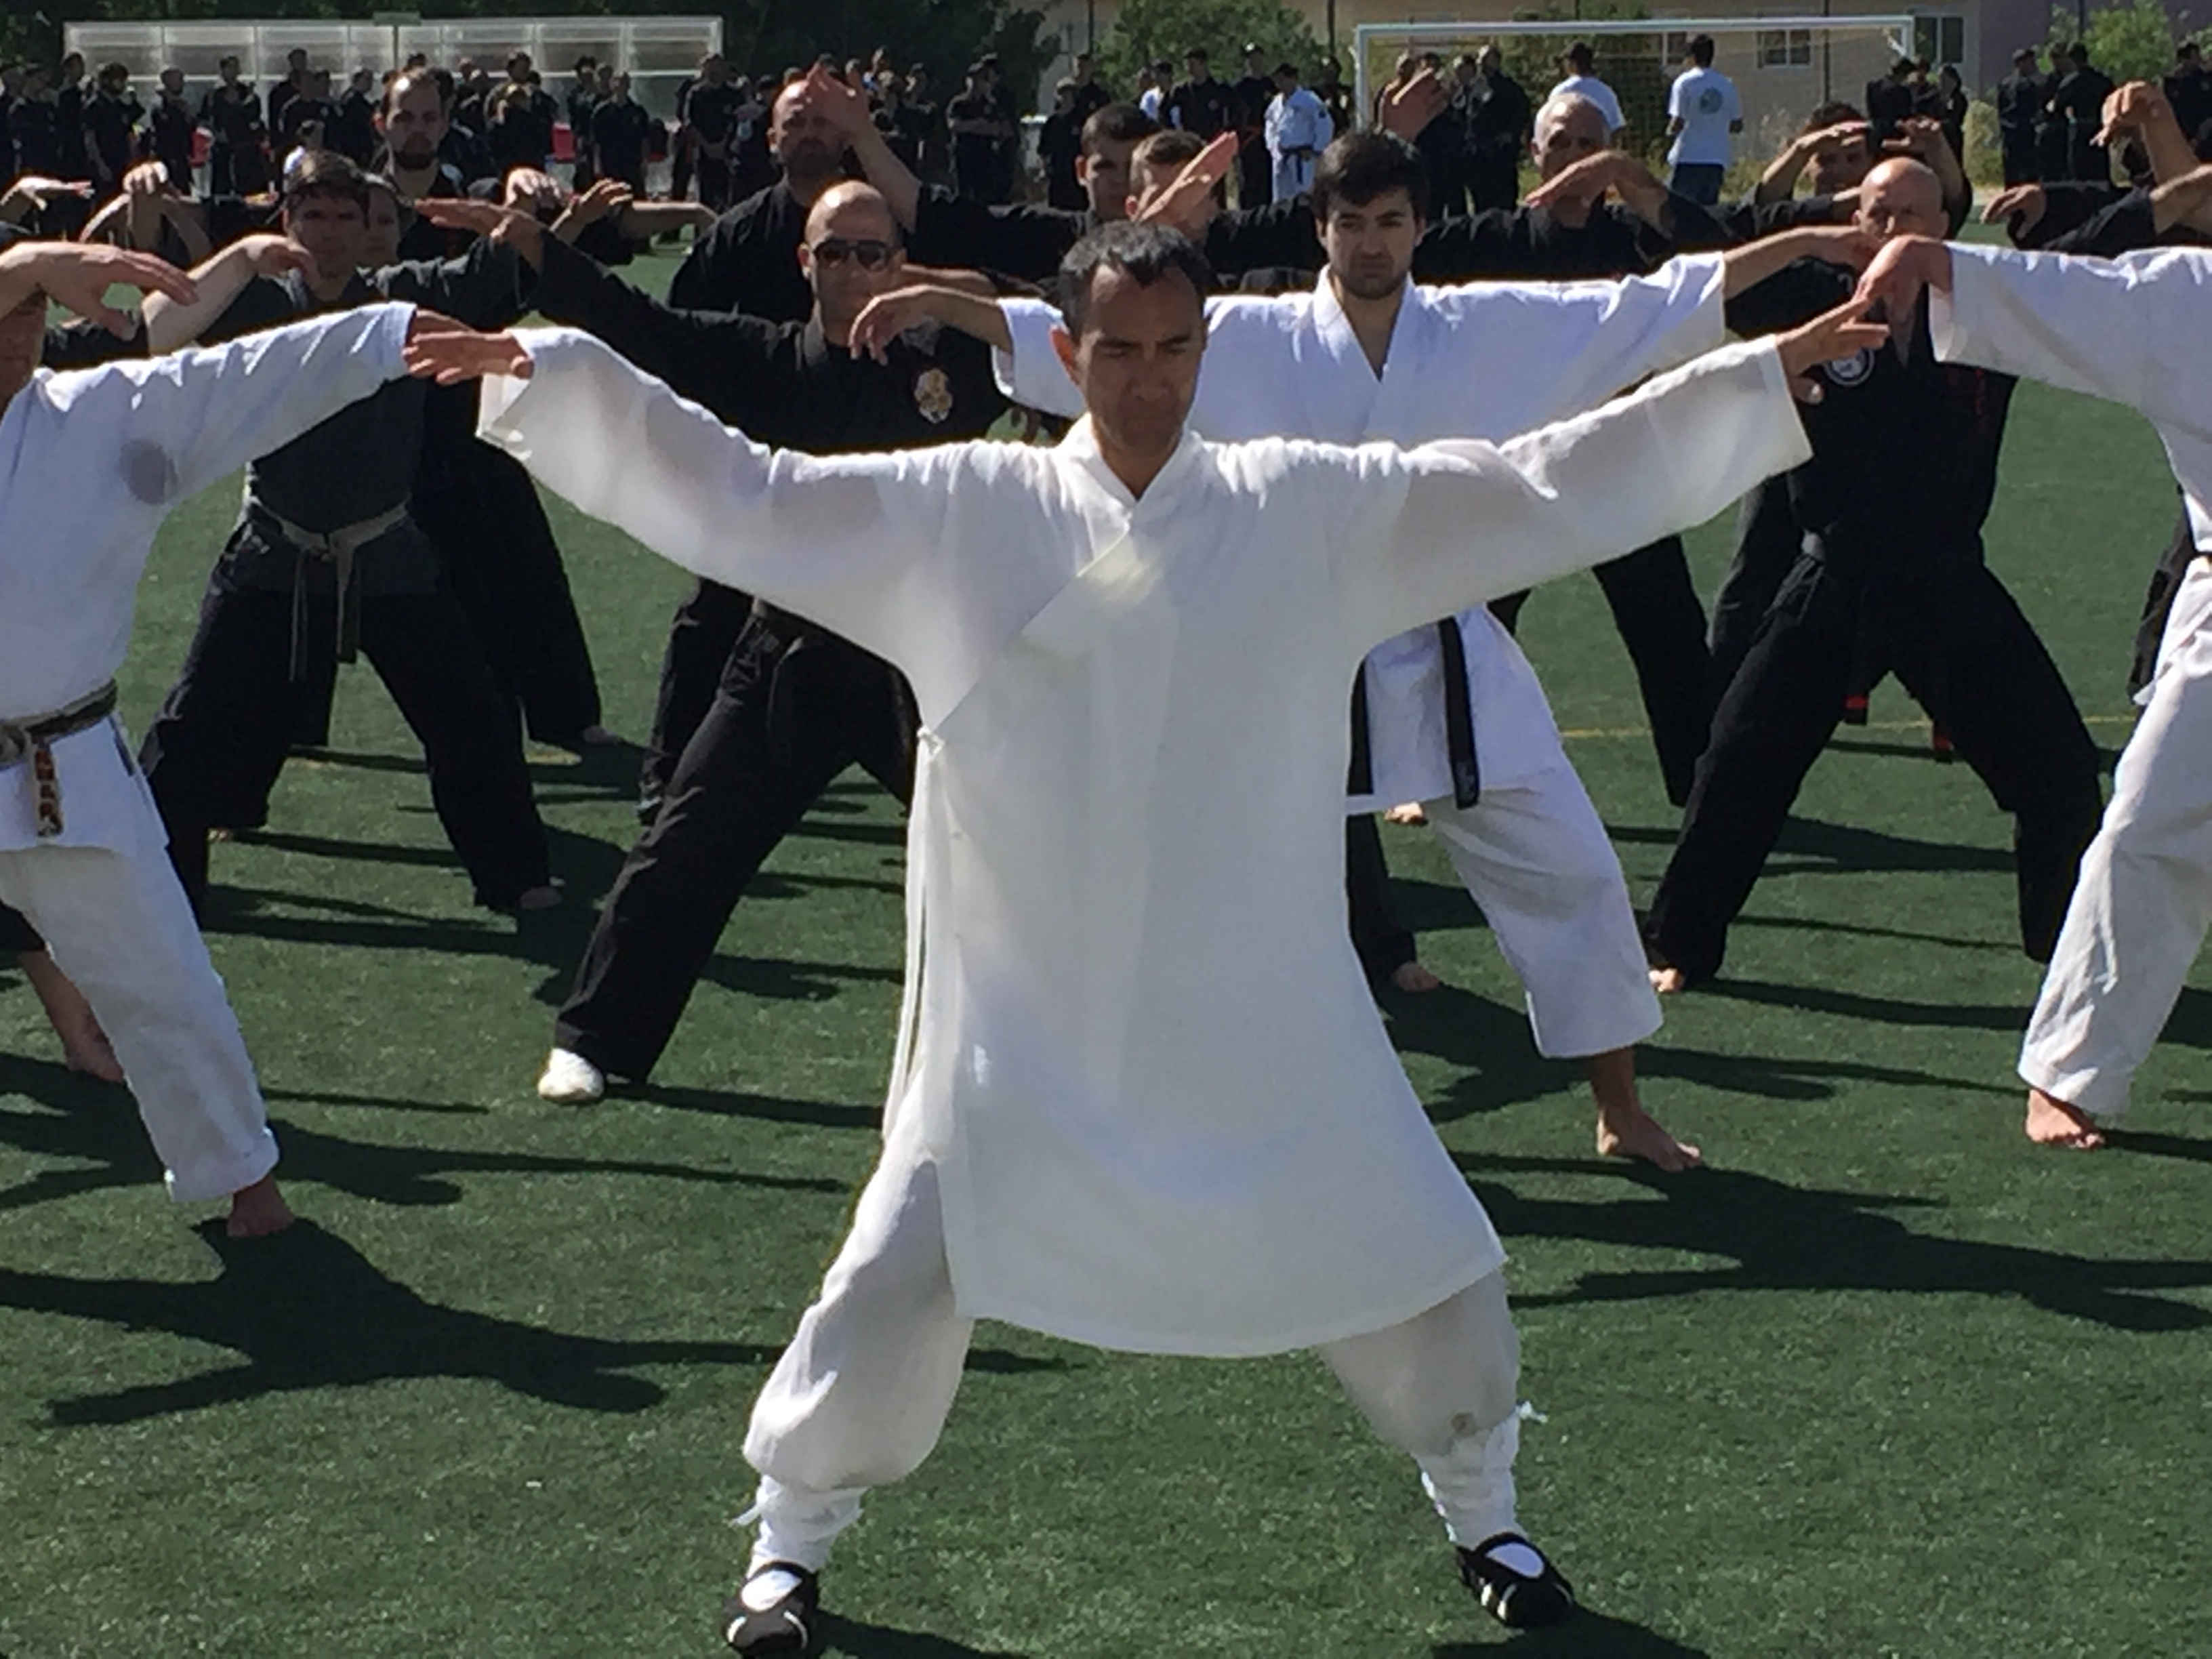 Teaching over 700 students Wudang Tai Chi and my family style of Kung Fu Ling Gar in Lisbon, Portugal